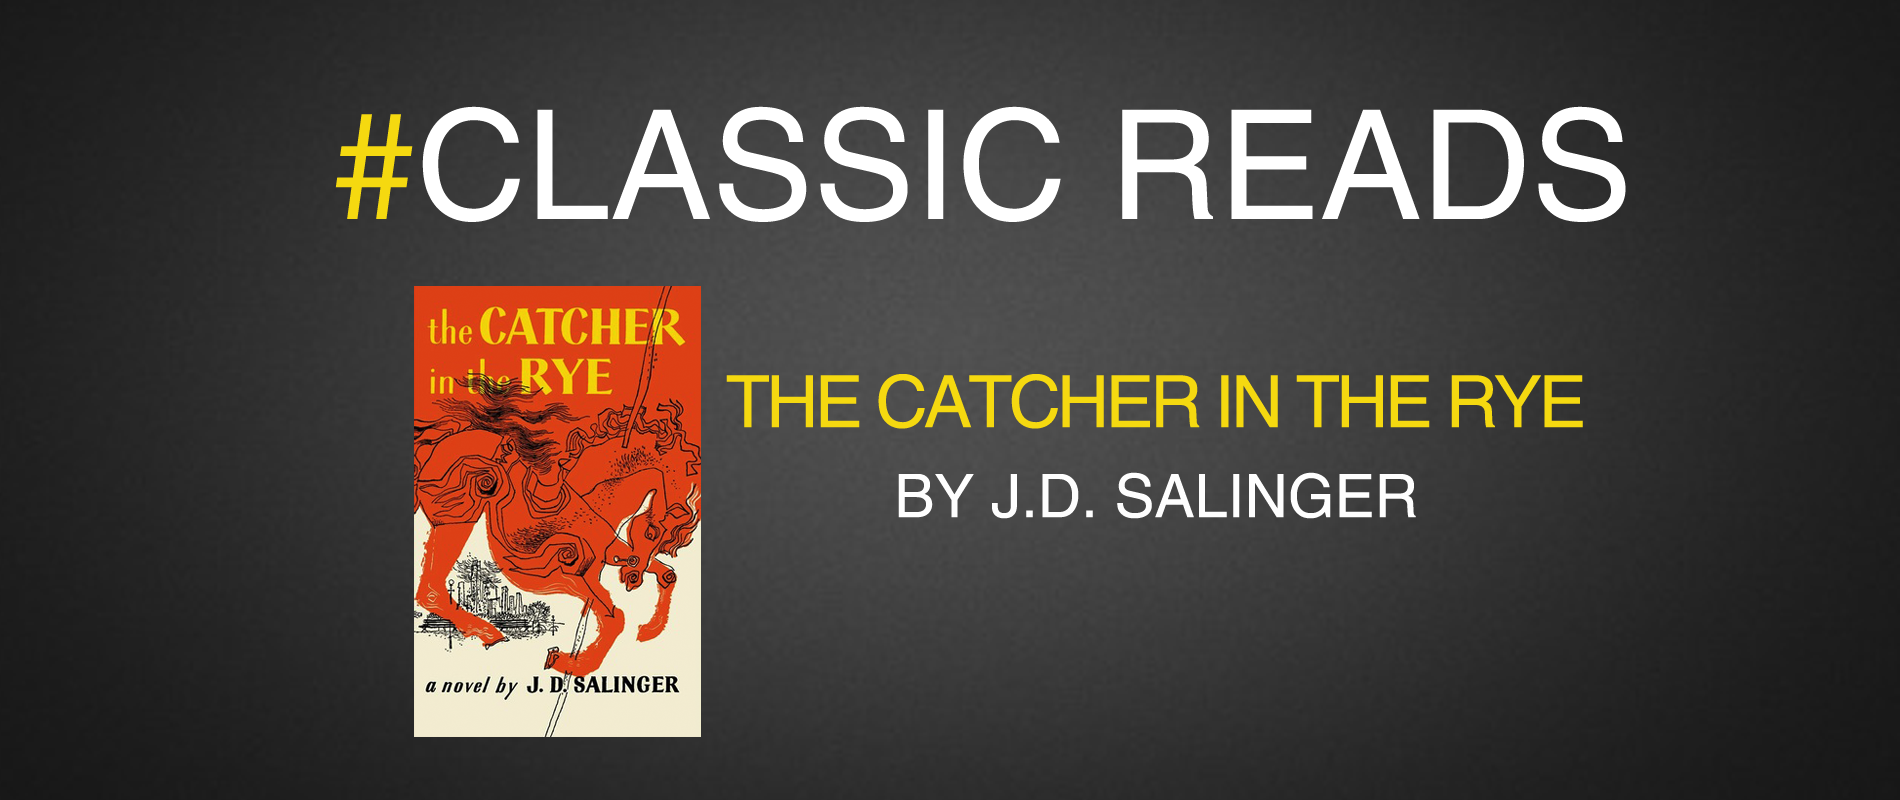 Considering 'The Catcher in the Rye', Challenging the Classics